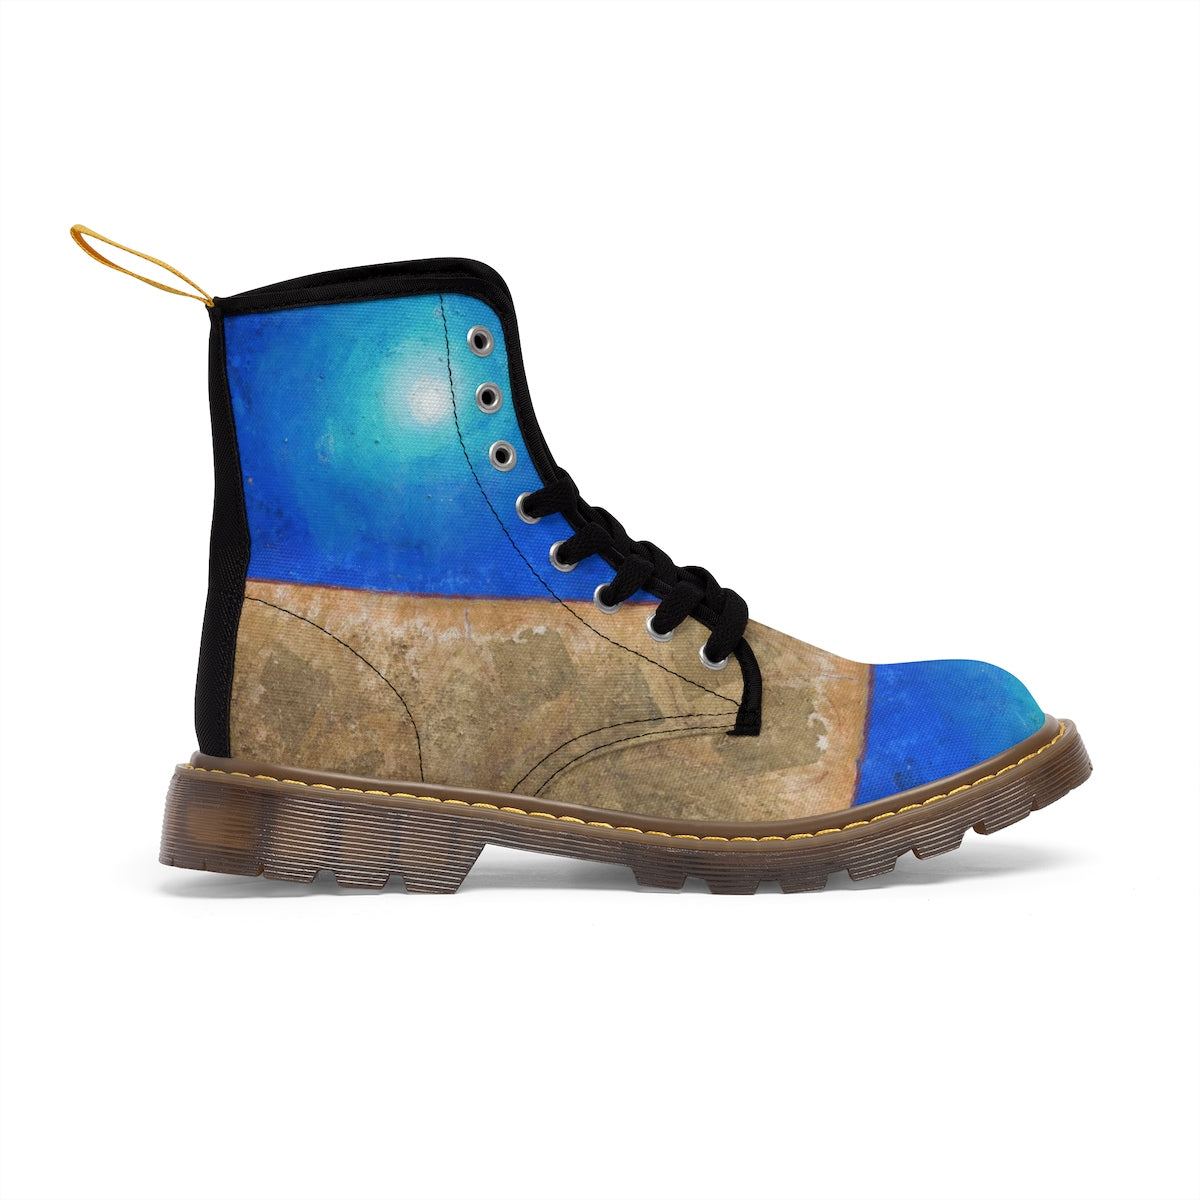 Women's Canvas Boots - Plant a seed in mind - centauresse